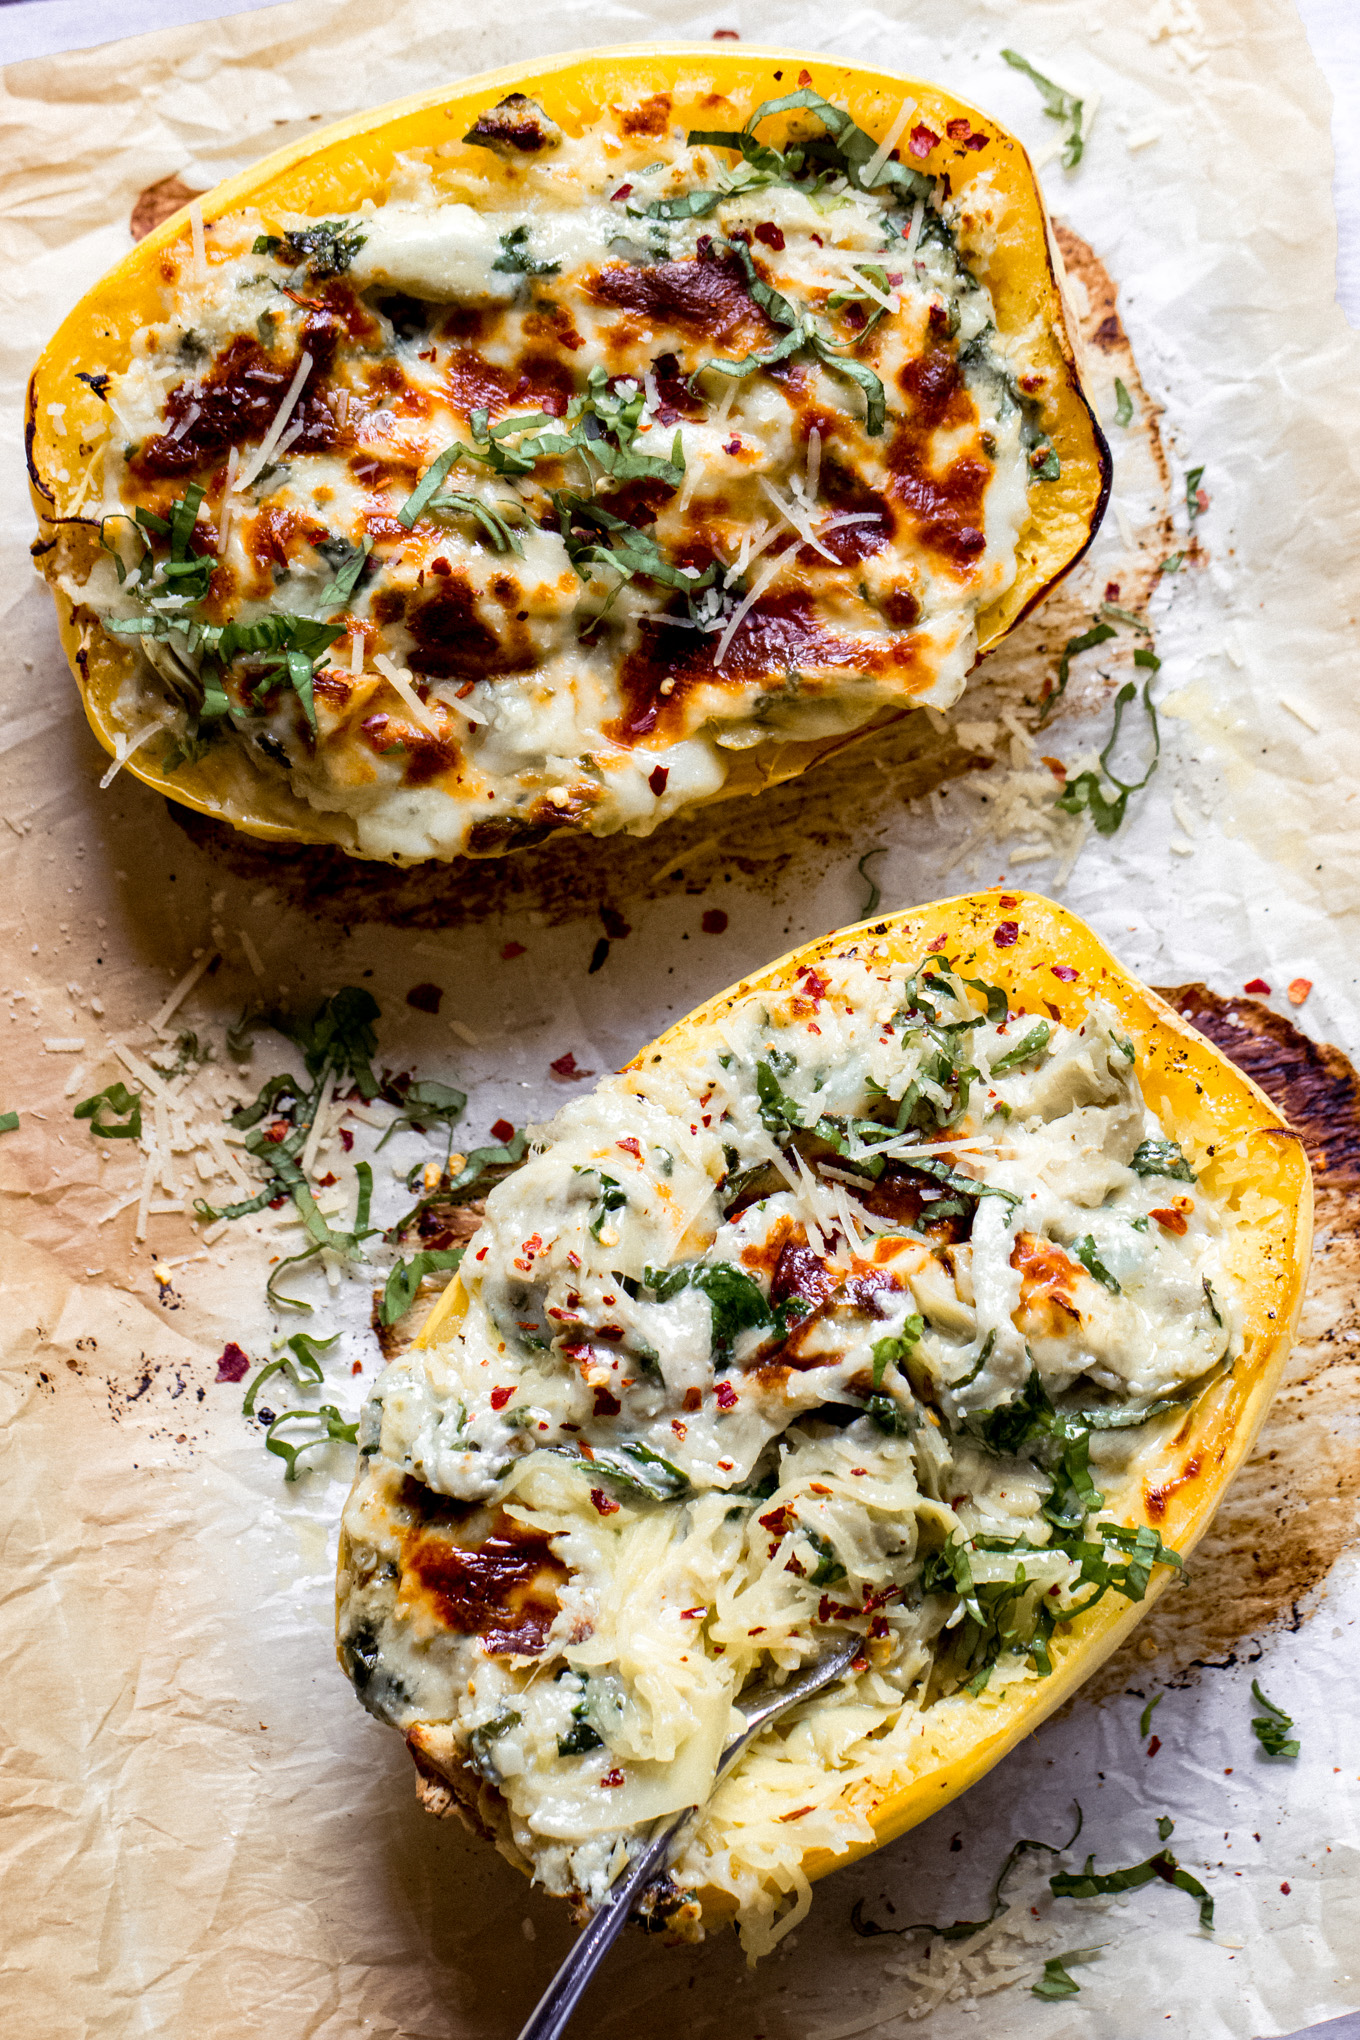 twice baked spaghetti squash with artichokes, spinach, and cheese.